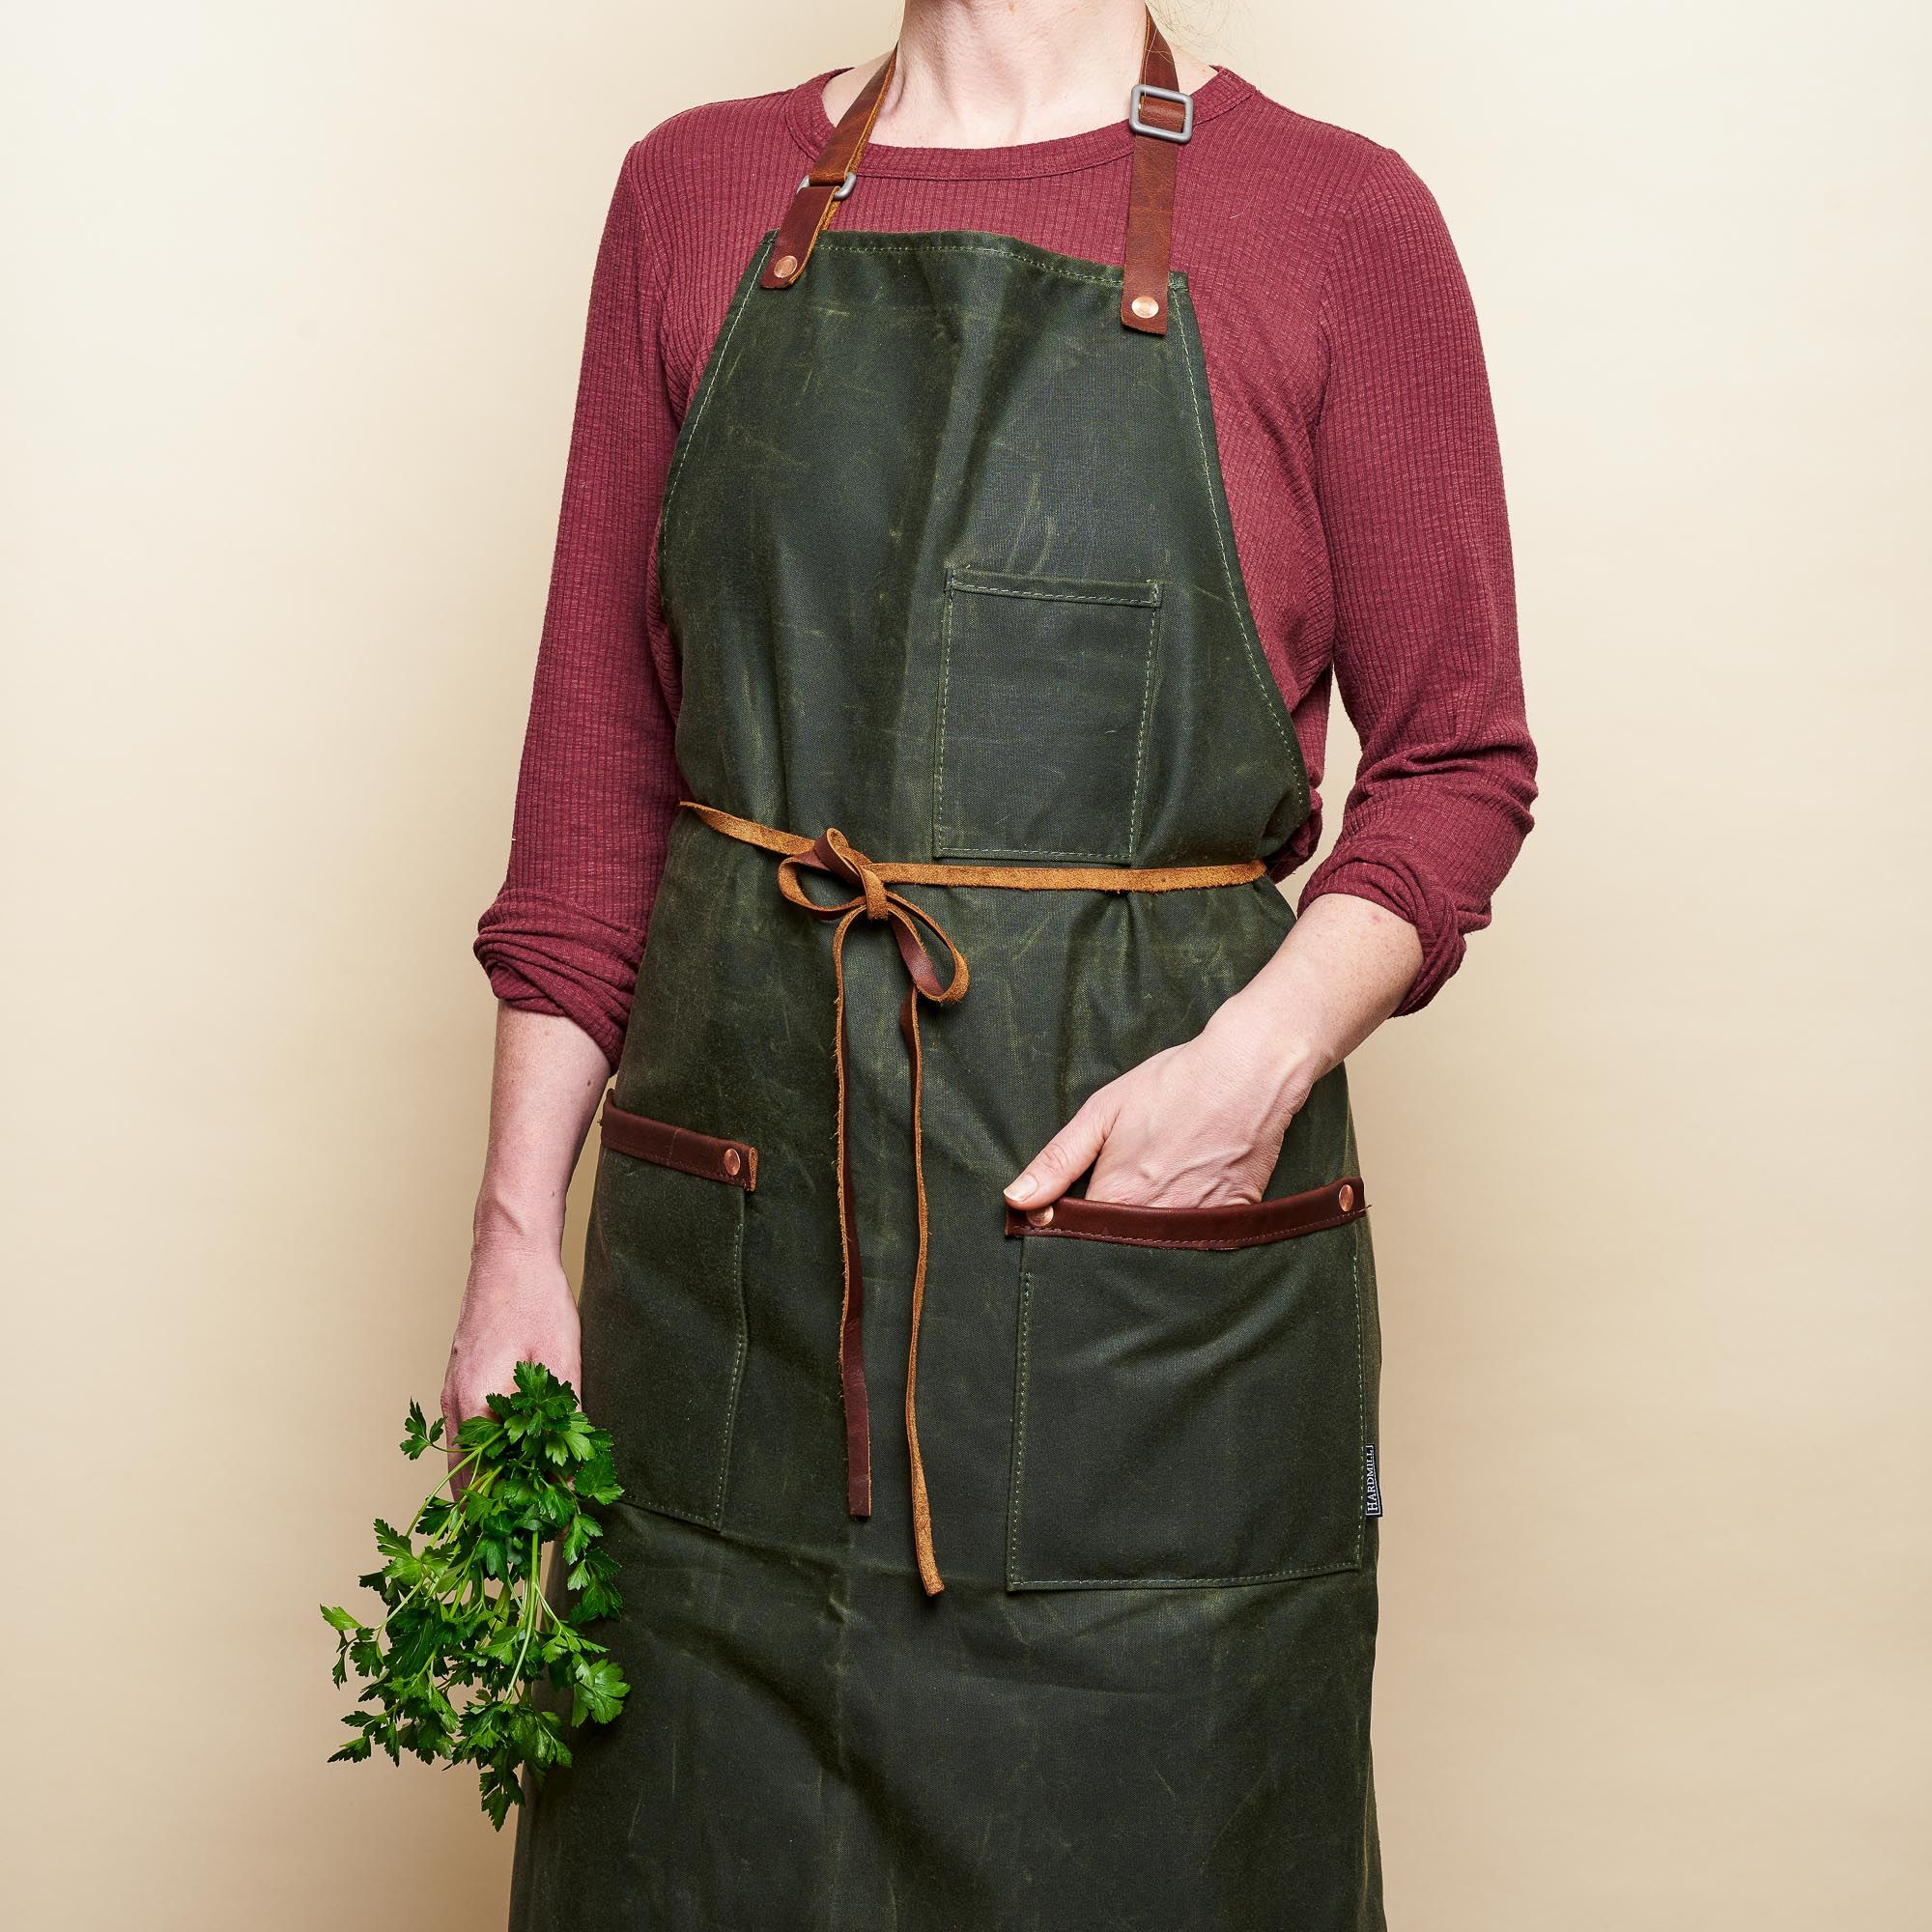 A woman models a forest-green waxed apron with leather straps and embellishments around the two wait pockets. There's a third pocket on the breast pocket. 